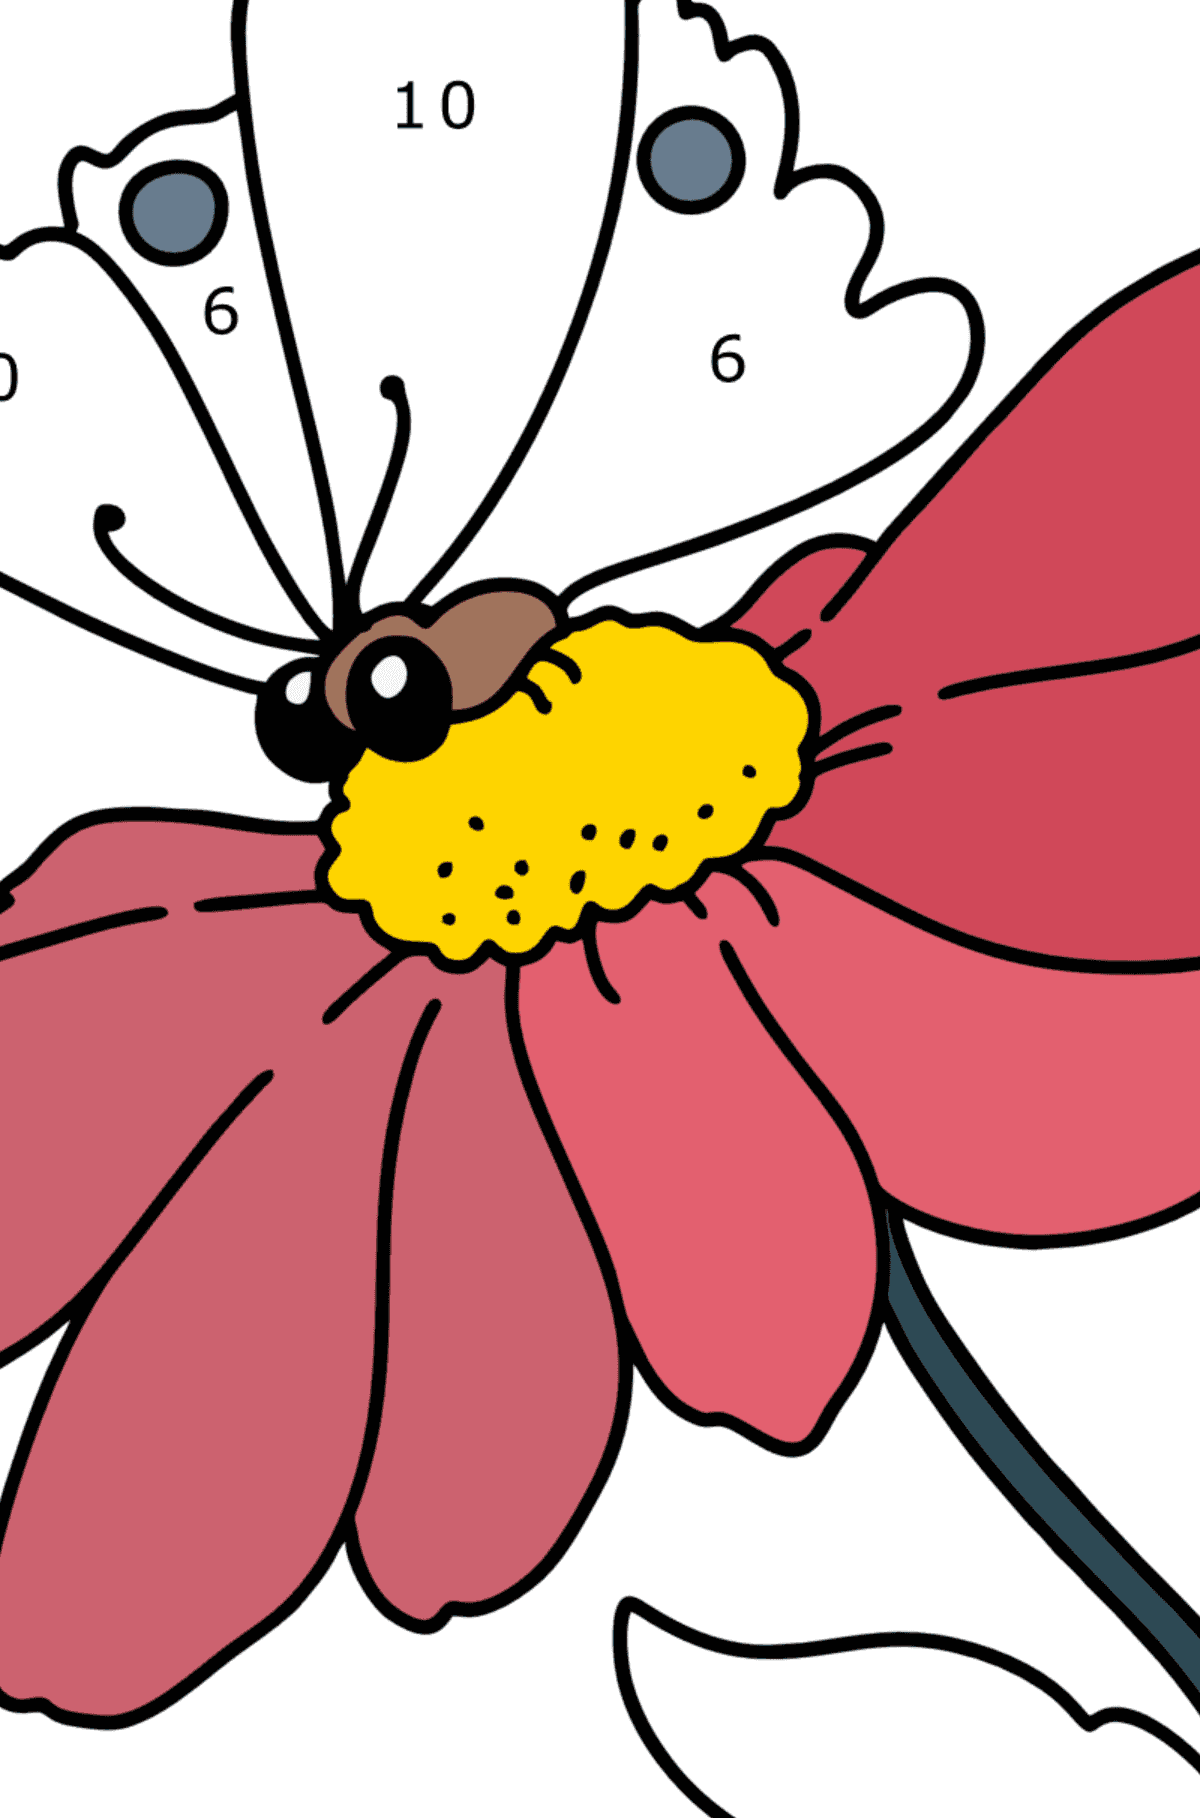 Summer Coloring page - Flowers and Butterfly - Coloring by Numbers for Kids